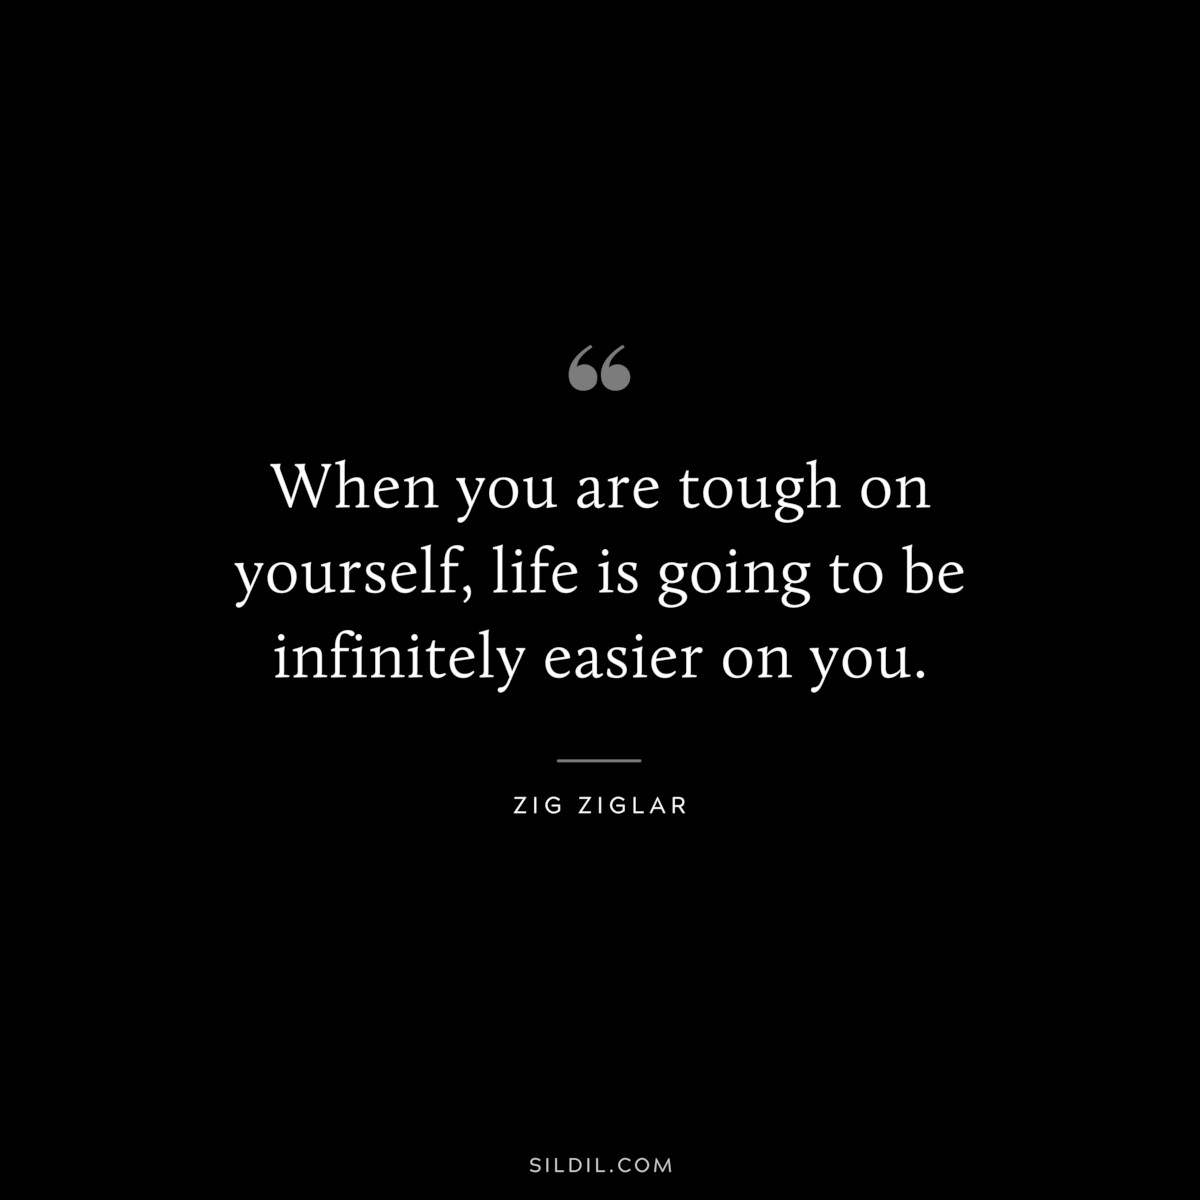 When you are tough on yourself, life is going to be infinitely easier on you. ― Zig Ziglar